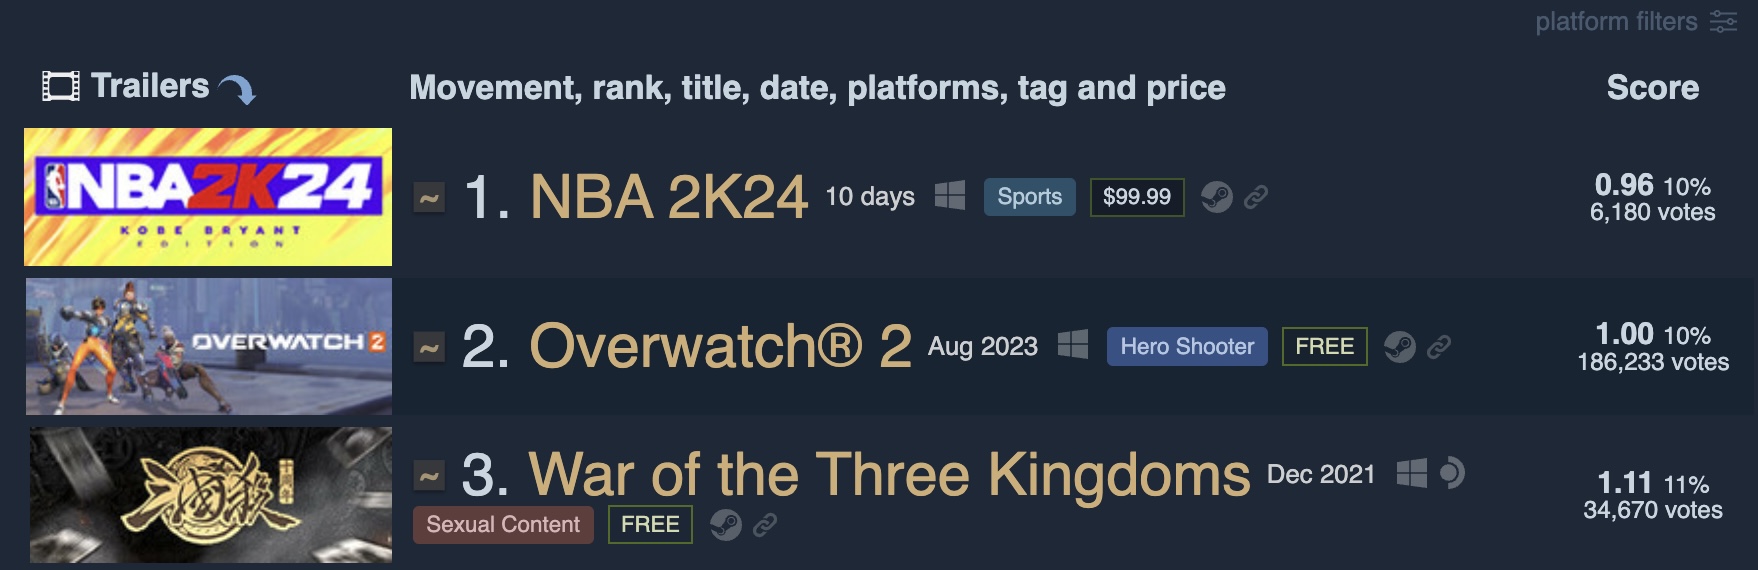 Why is NBA 2K24 one of the worst reviewed games on Steam?